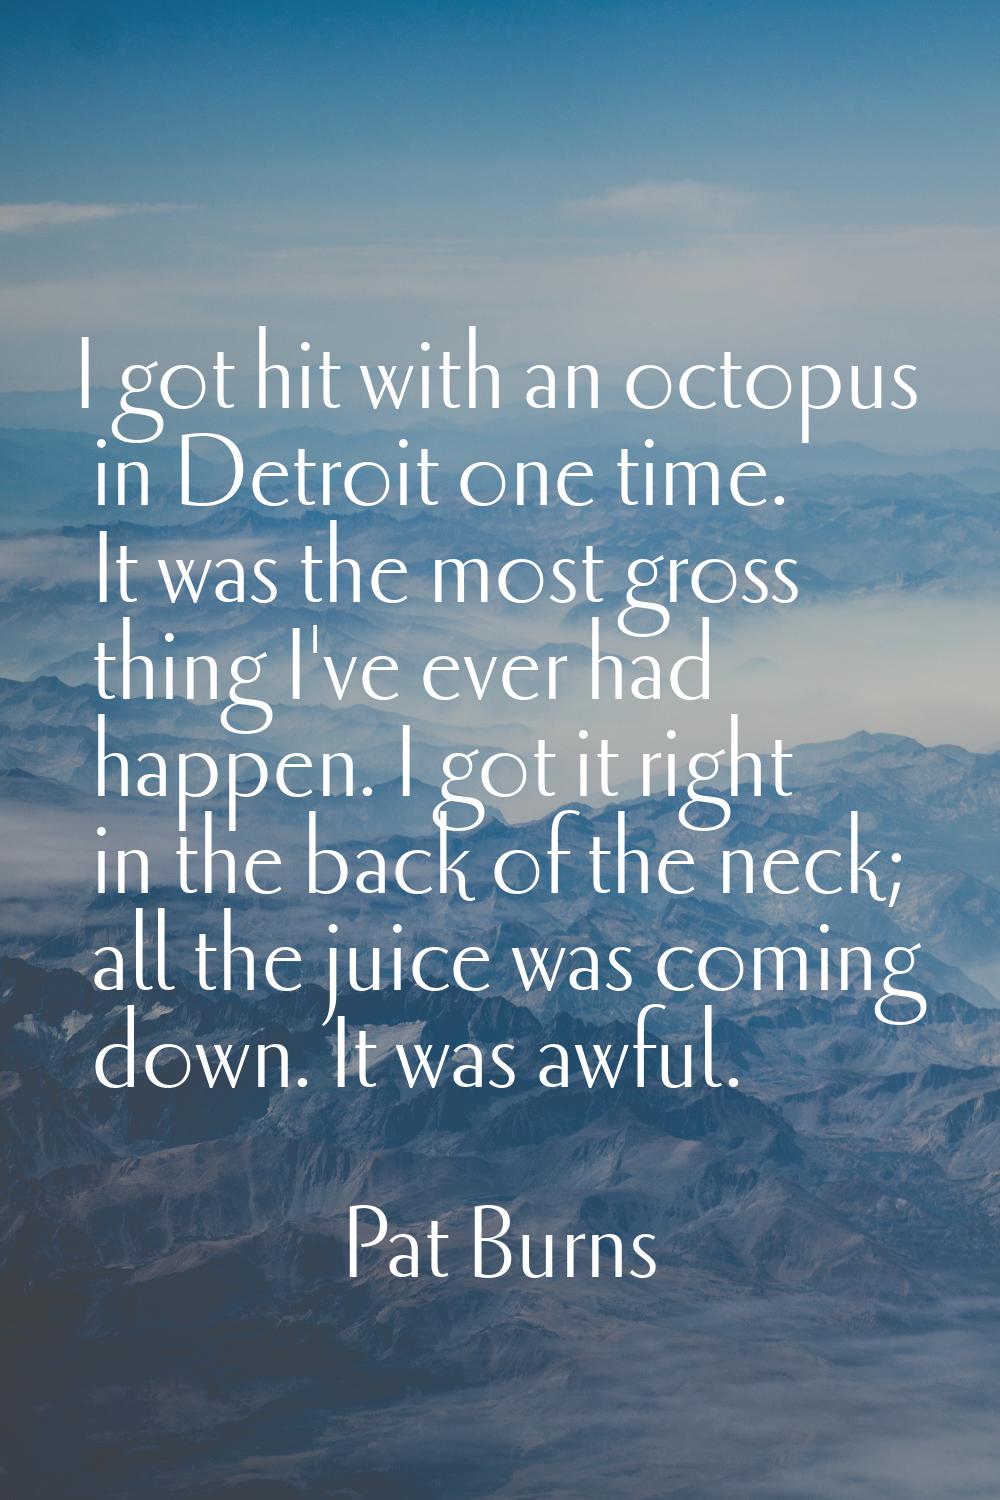 I got hit with an octopus in Detroit one time. It was the most gross thing I've ever had happen. I 